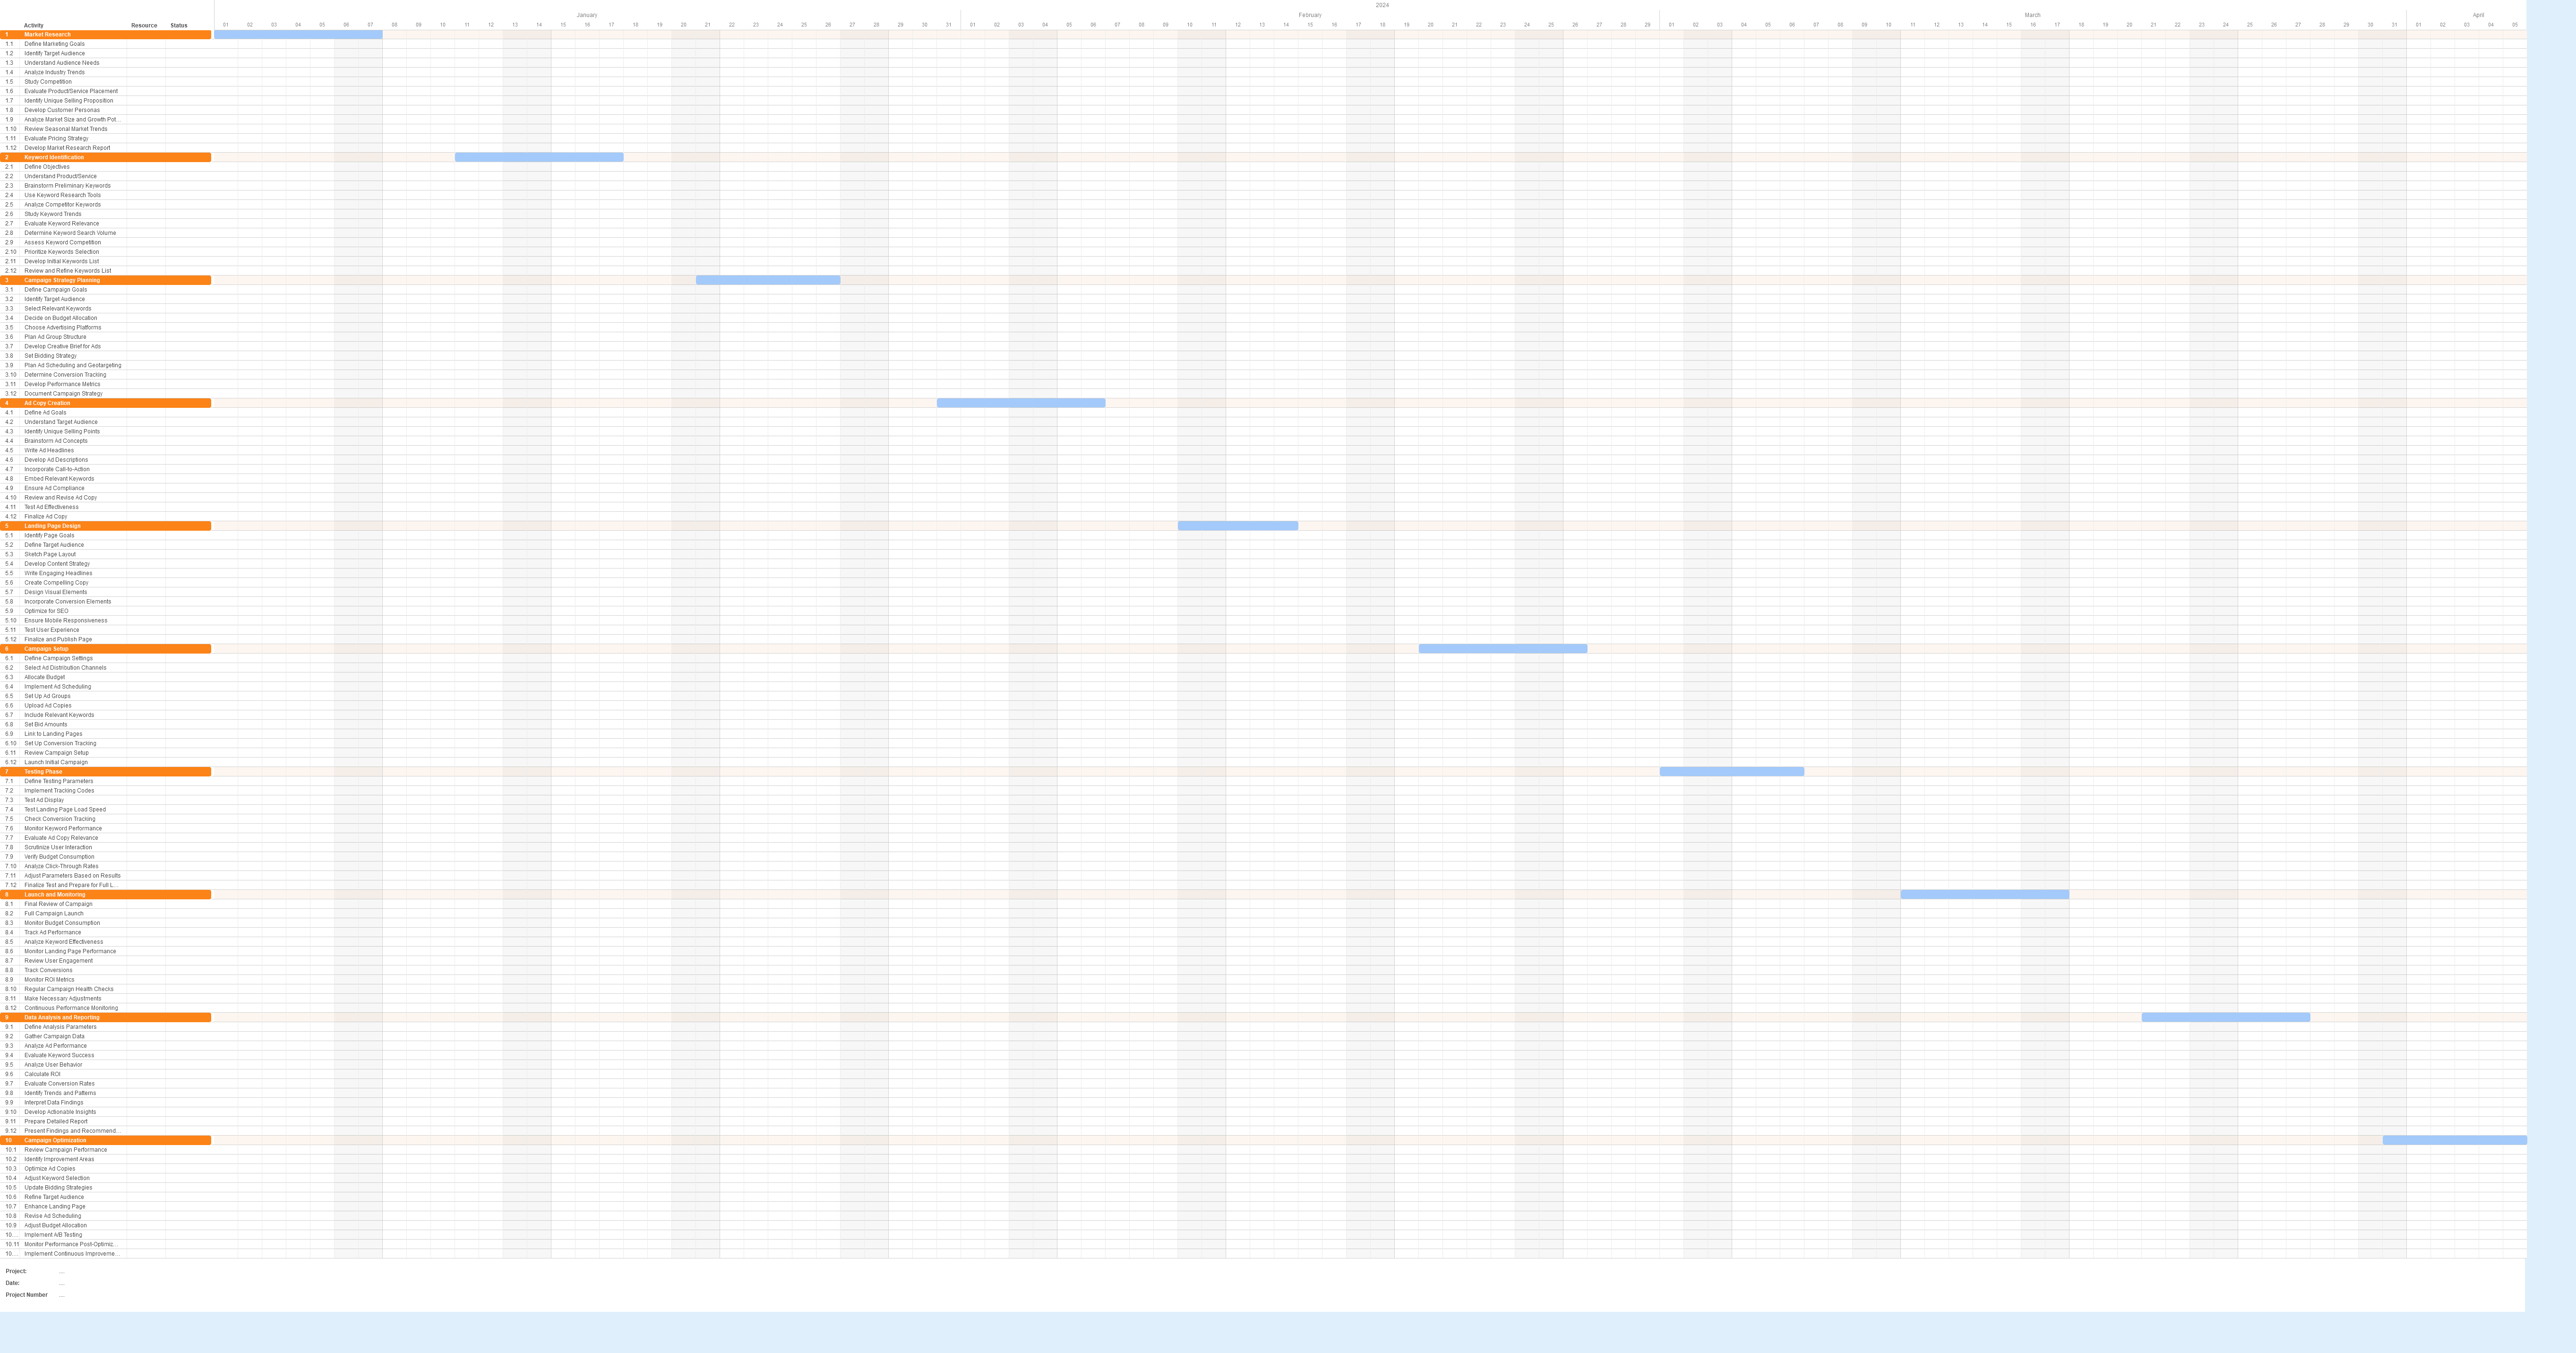 Gantt chart for a Pay-Per-Click Advertising project